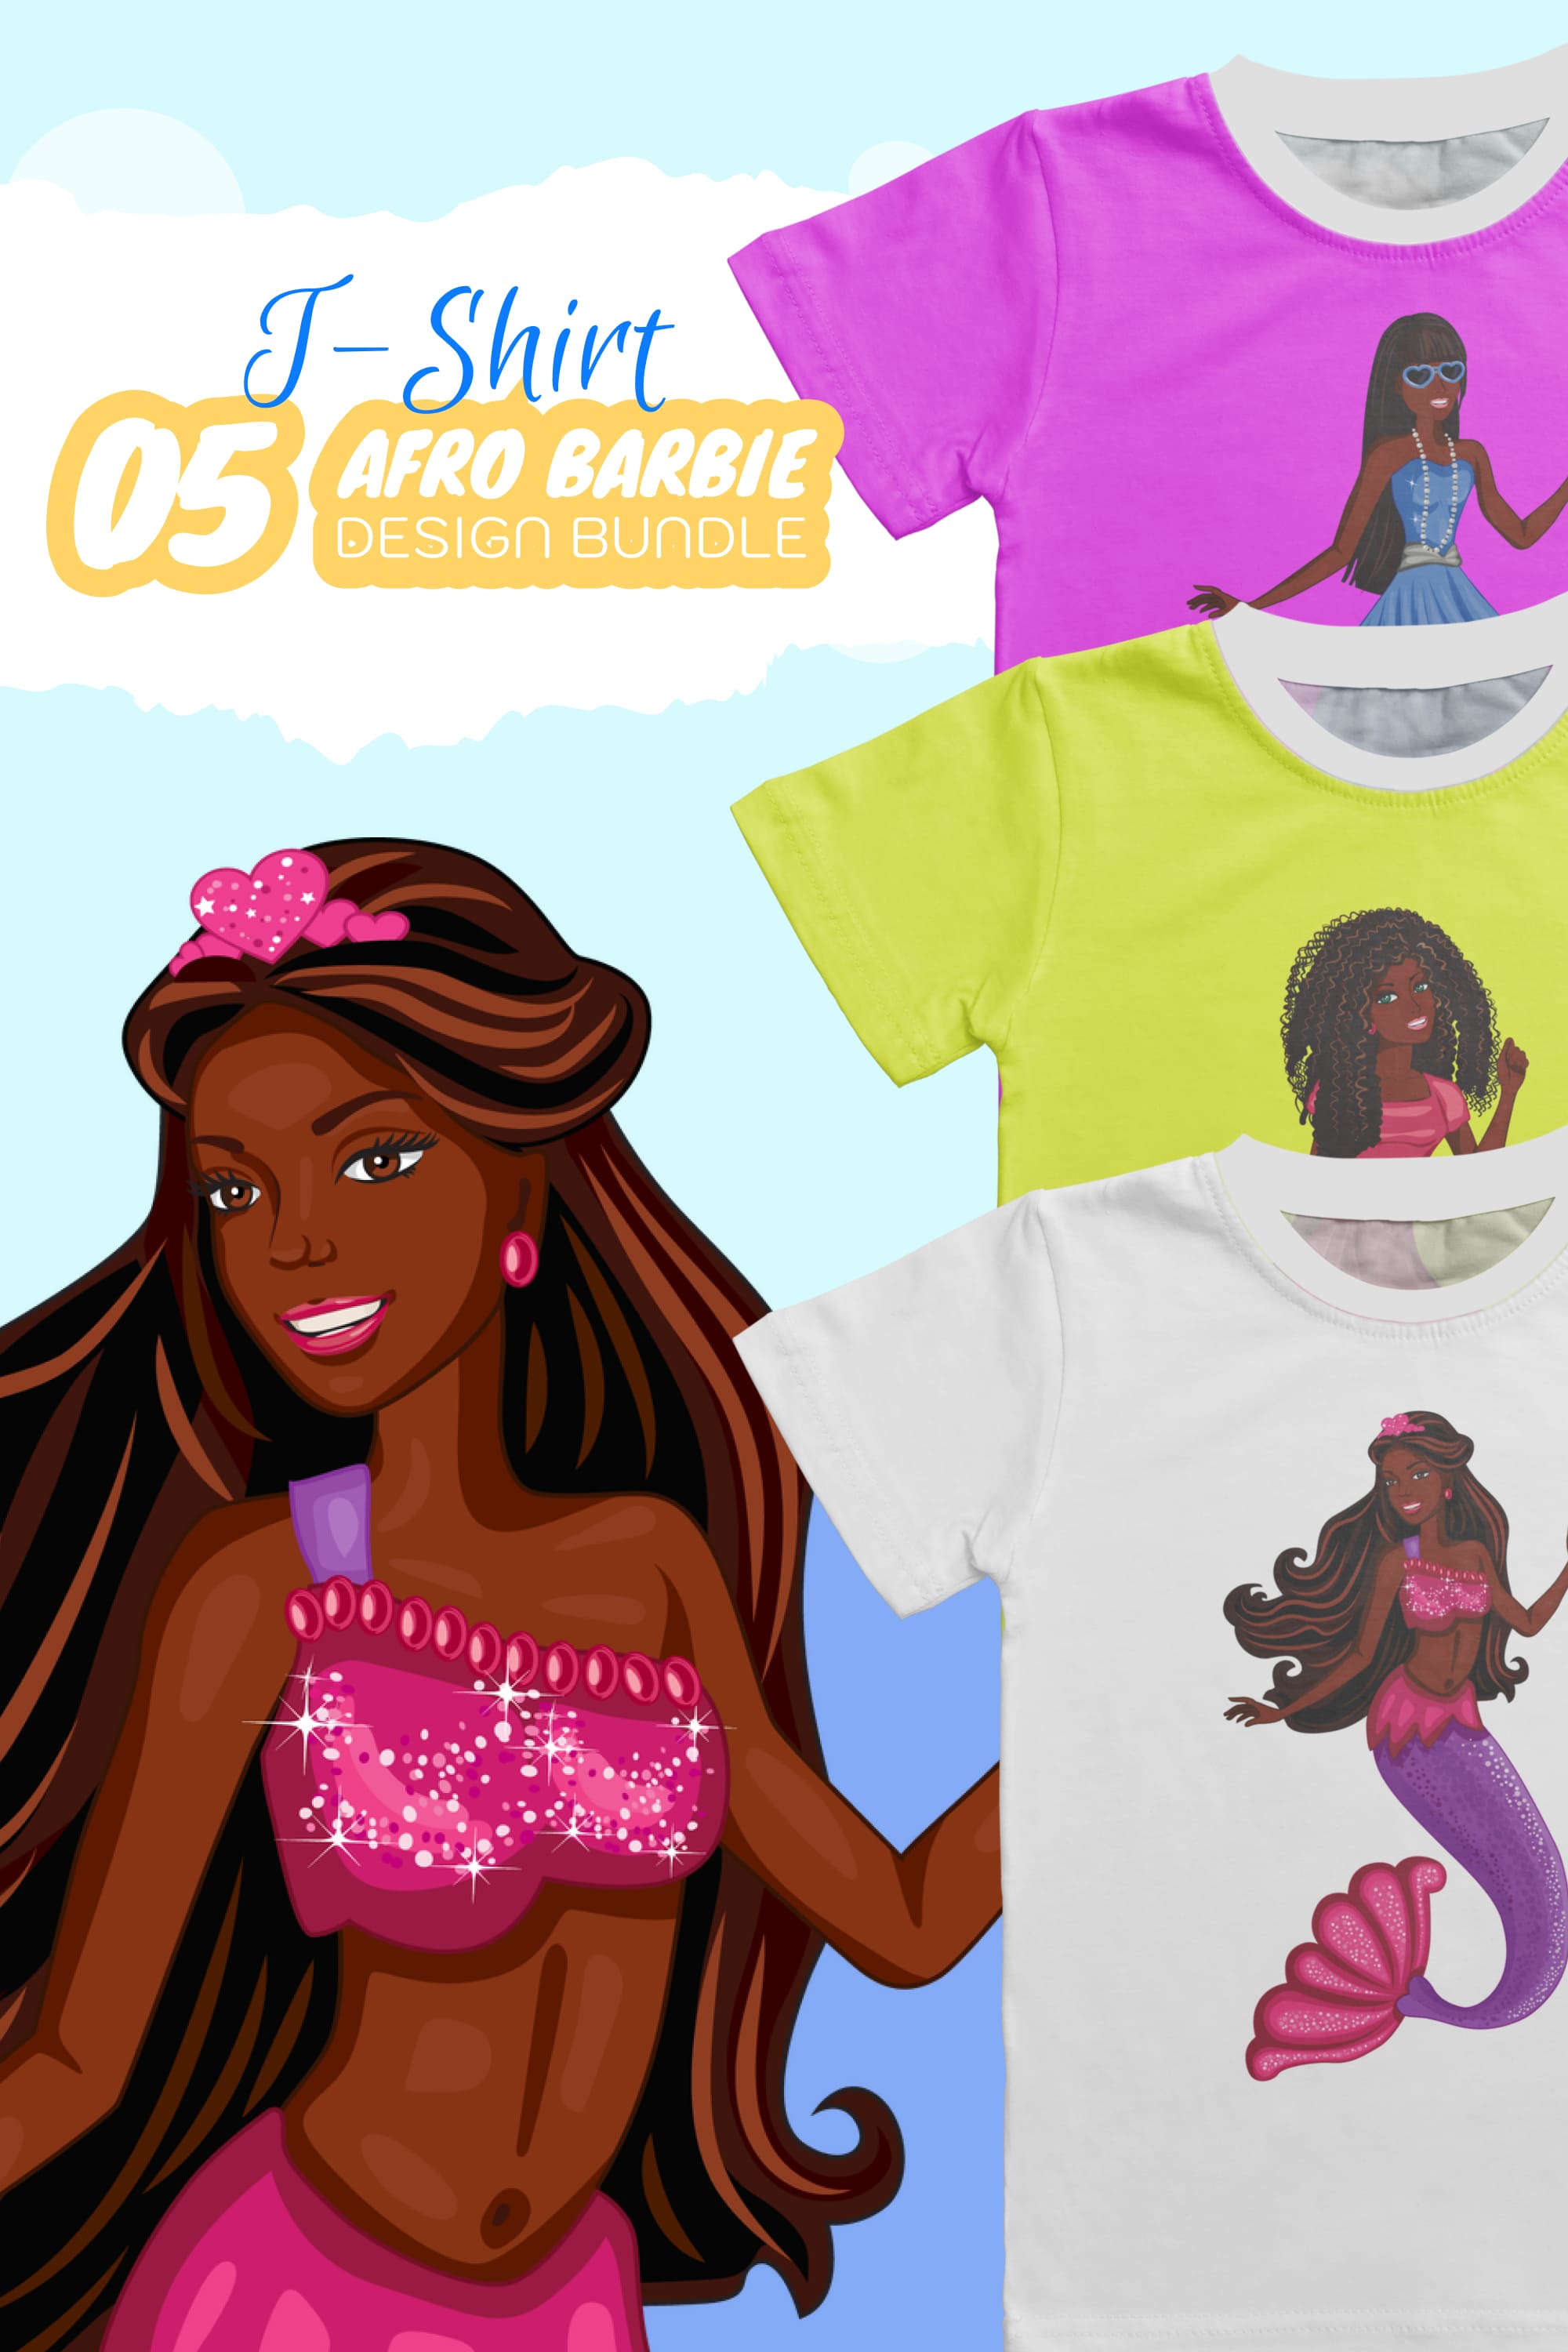 A beautiful dark barbie as a print for any t-shirt.